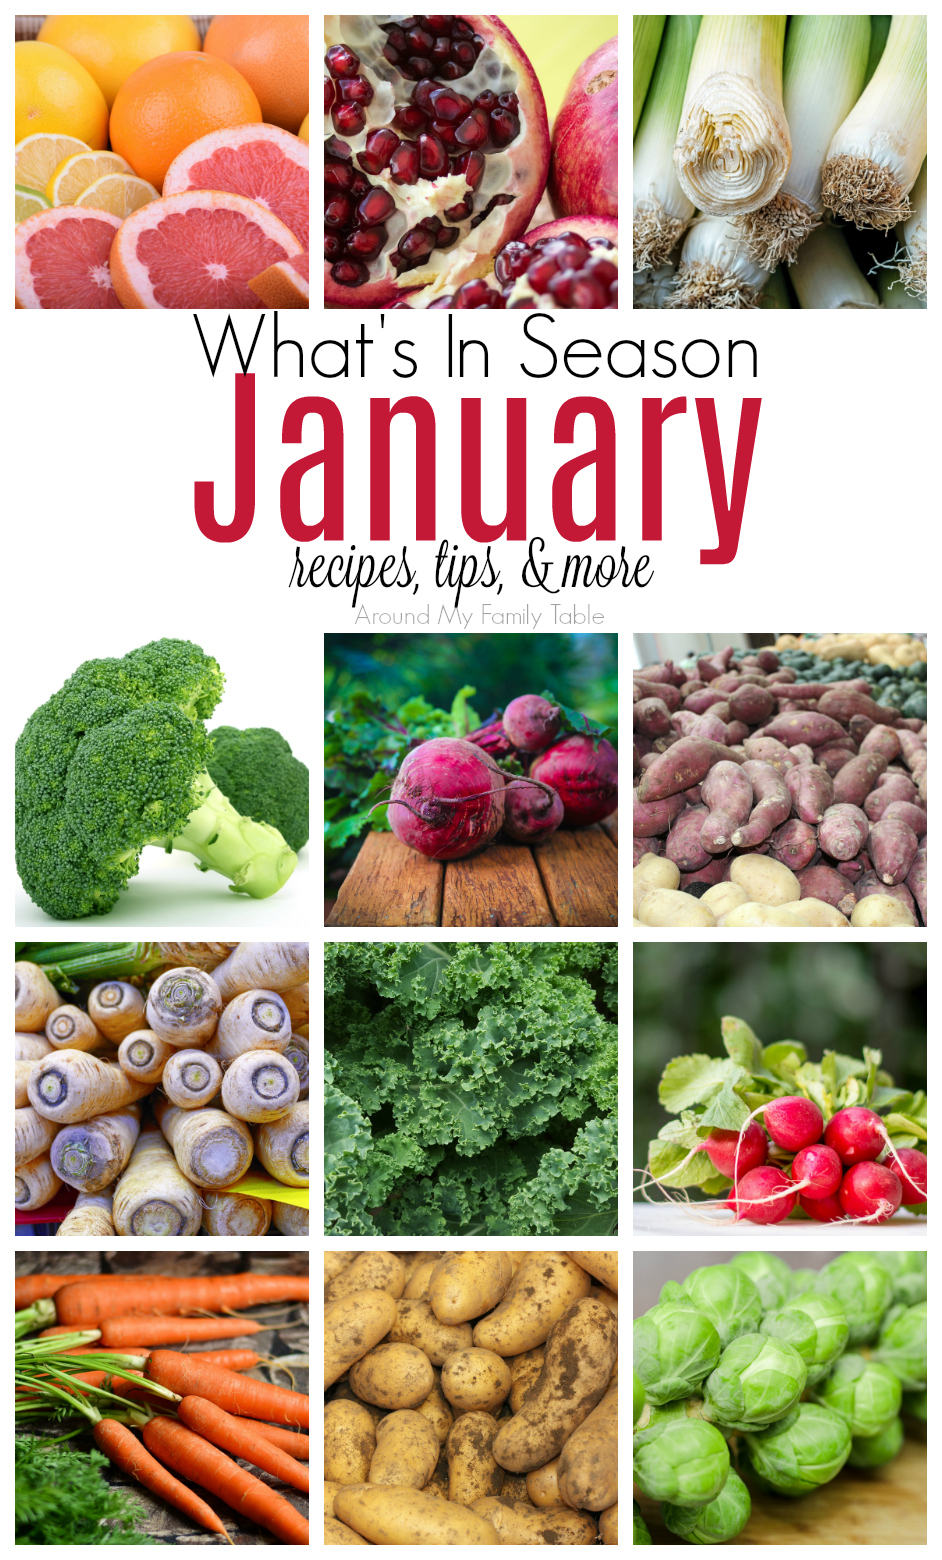 This January -- What's in Season Guide is full of tips and recipes to inspire you to shop and eat seasonally.